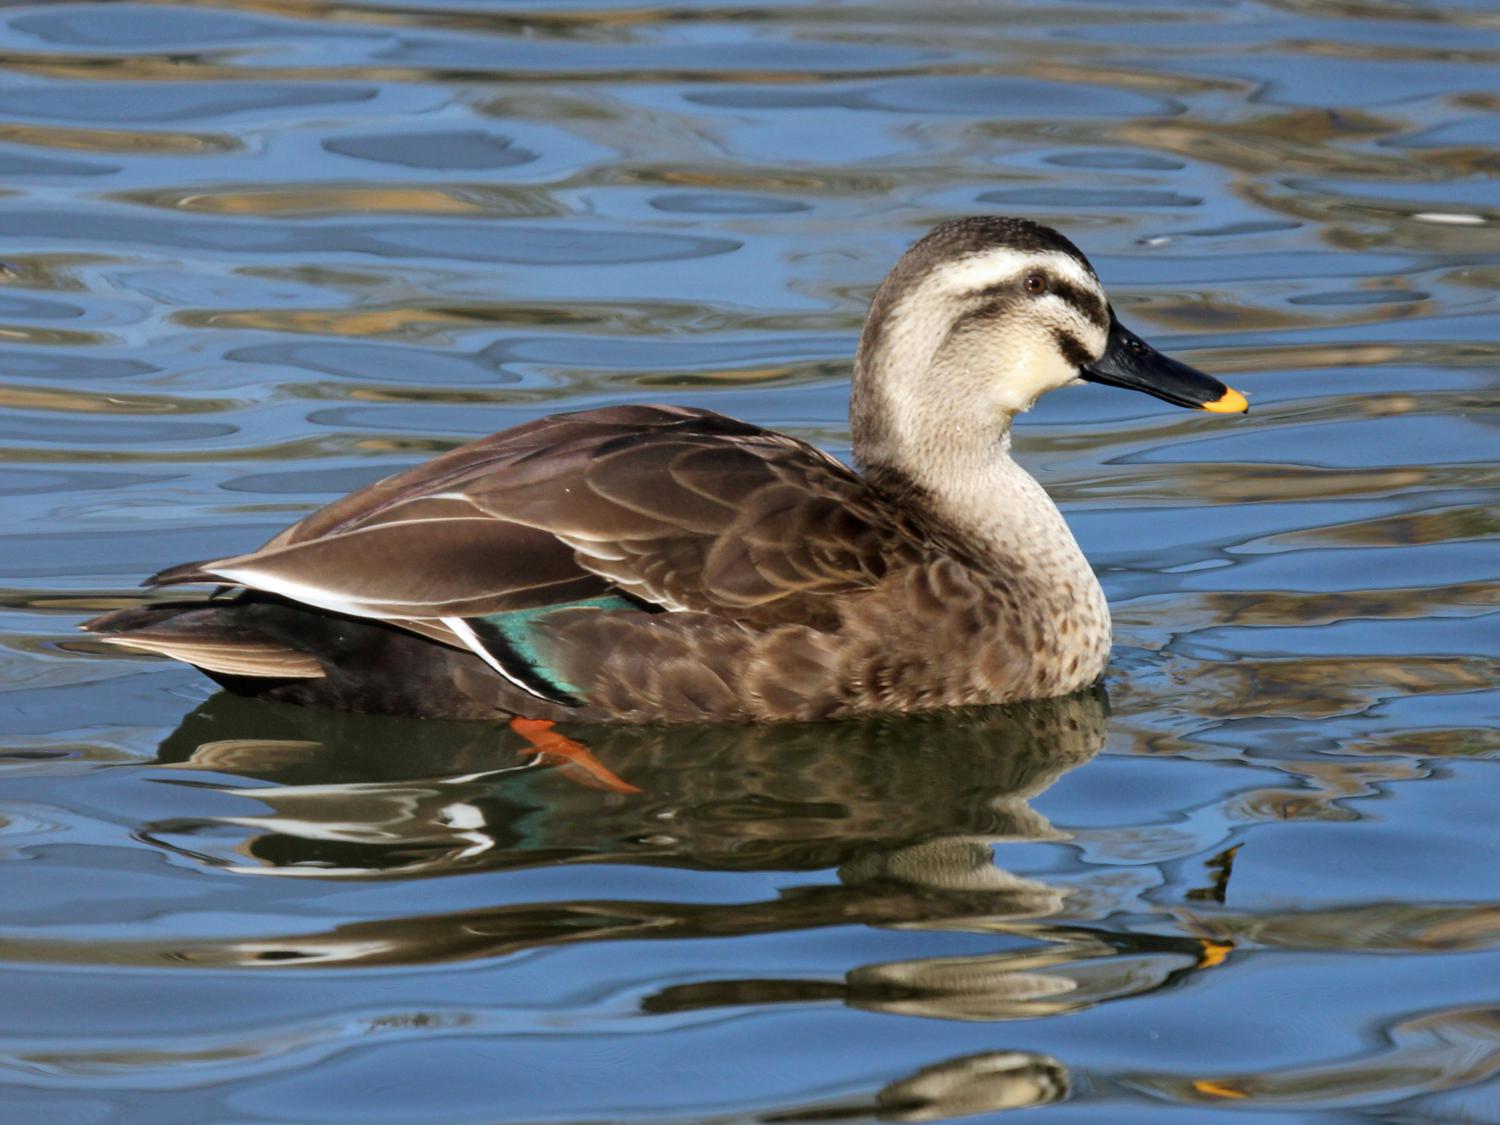 Image of Chinese Spot-billed Duck